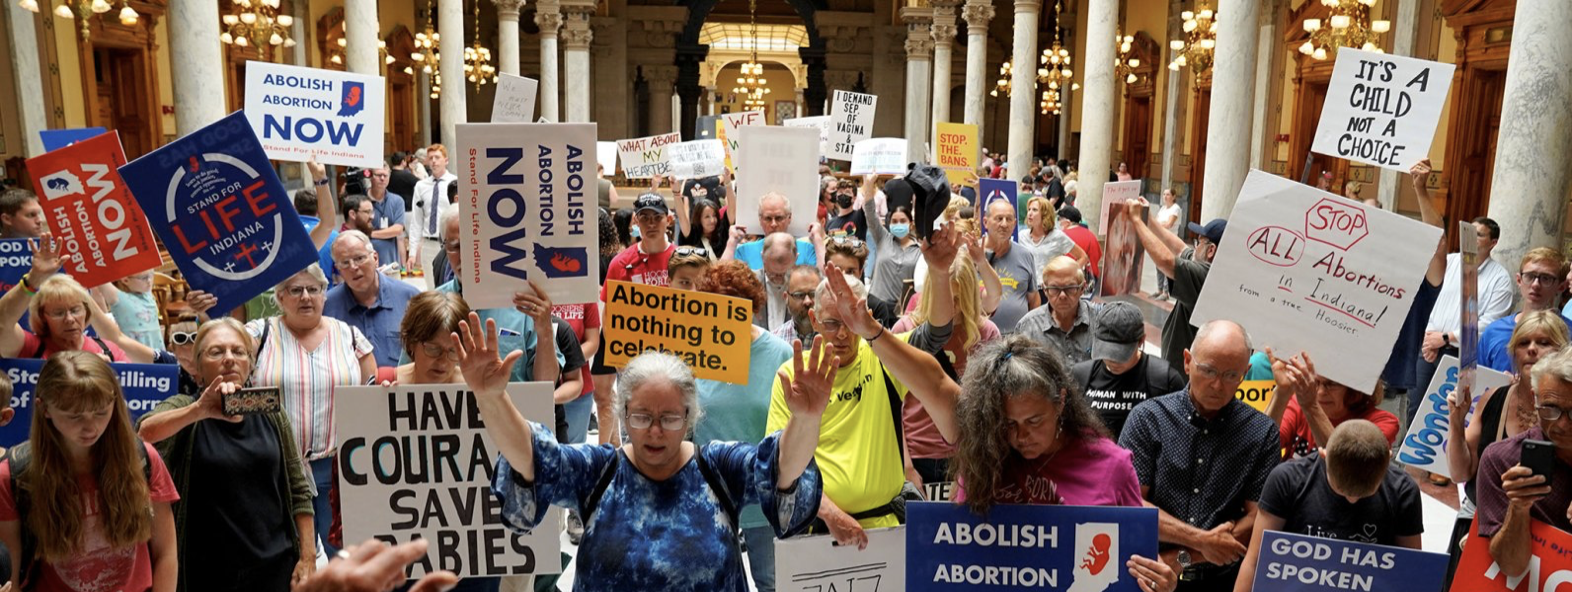 Pro-life protesters pray in IN statehouse